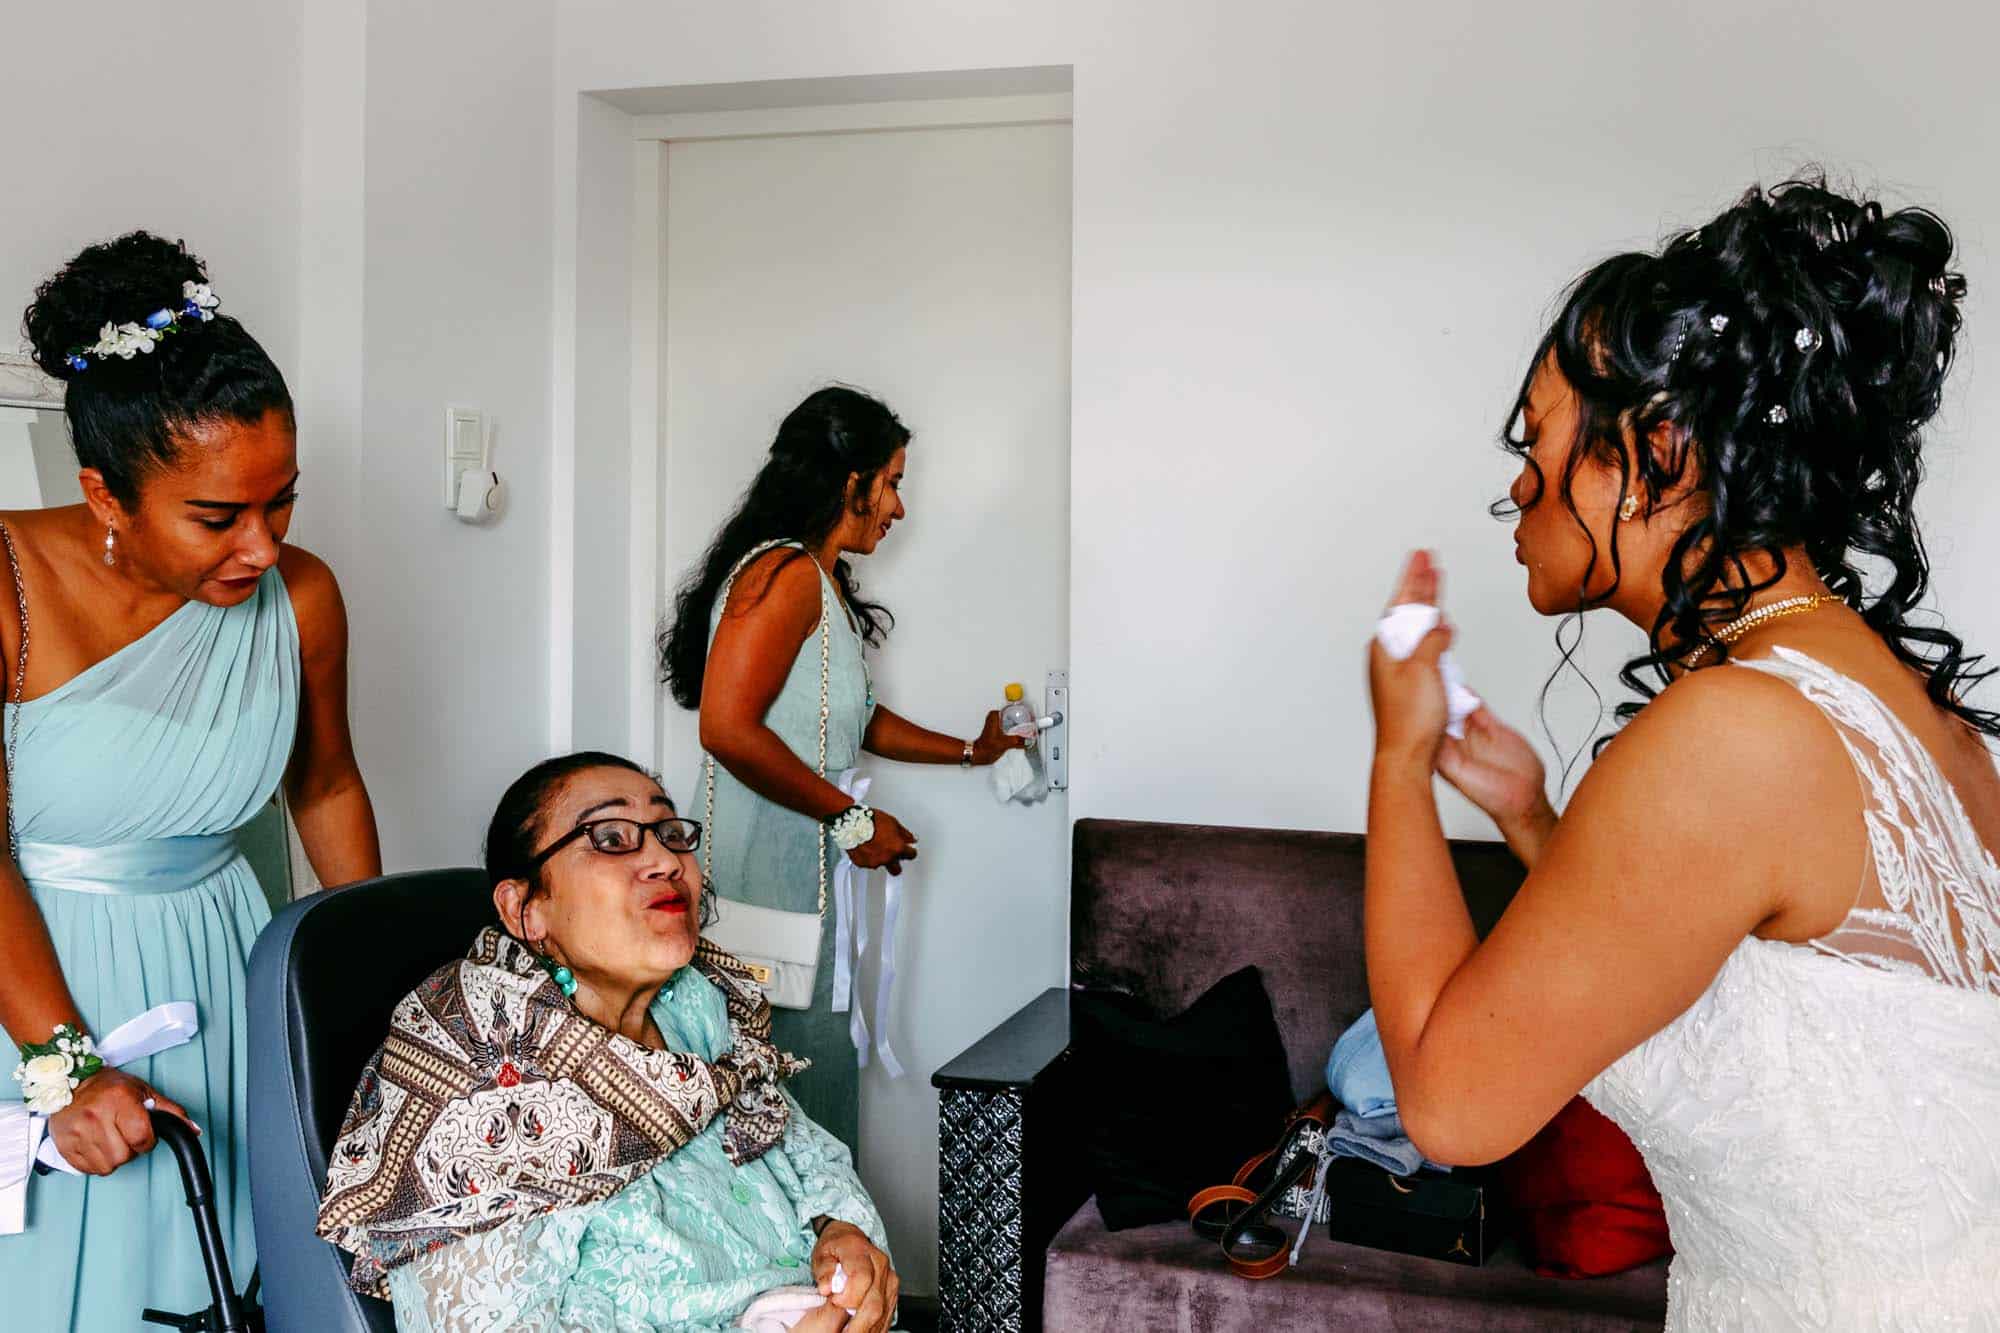 Bridesmaids get ready in a room with a woman in a wheelchair and take special wedding photos.